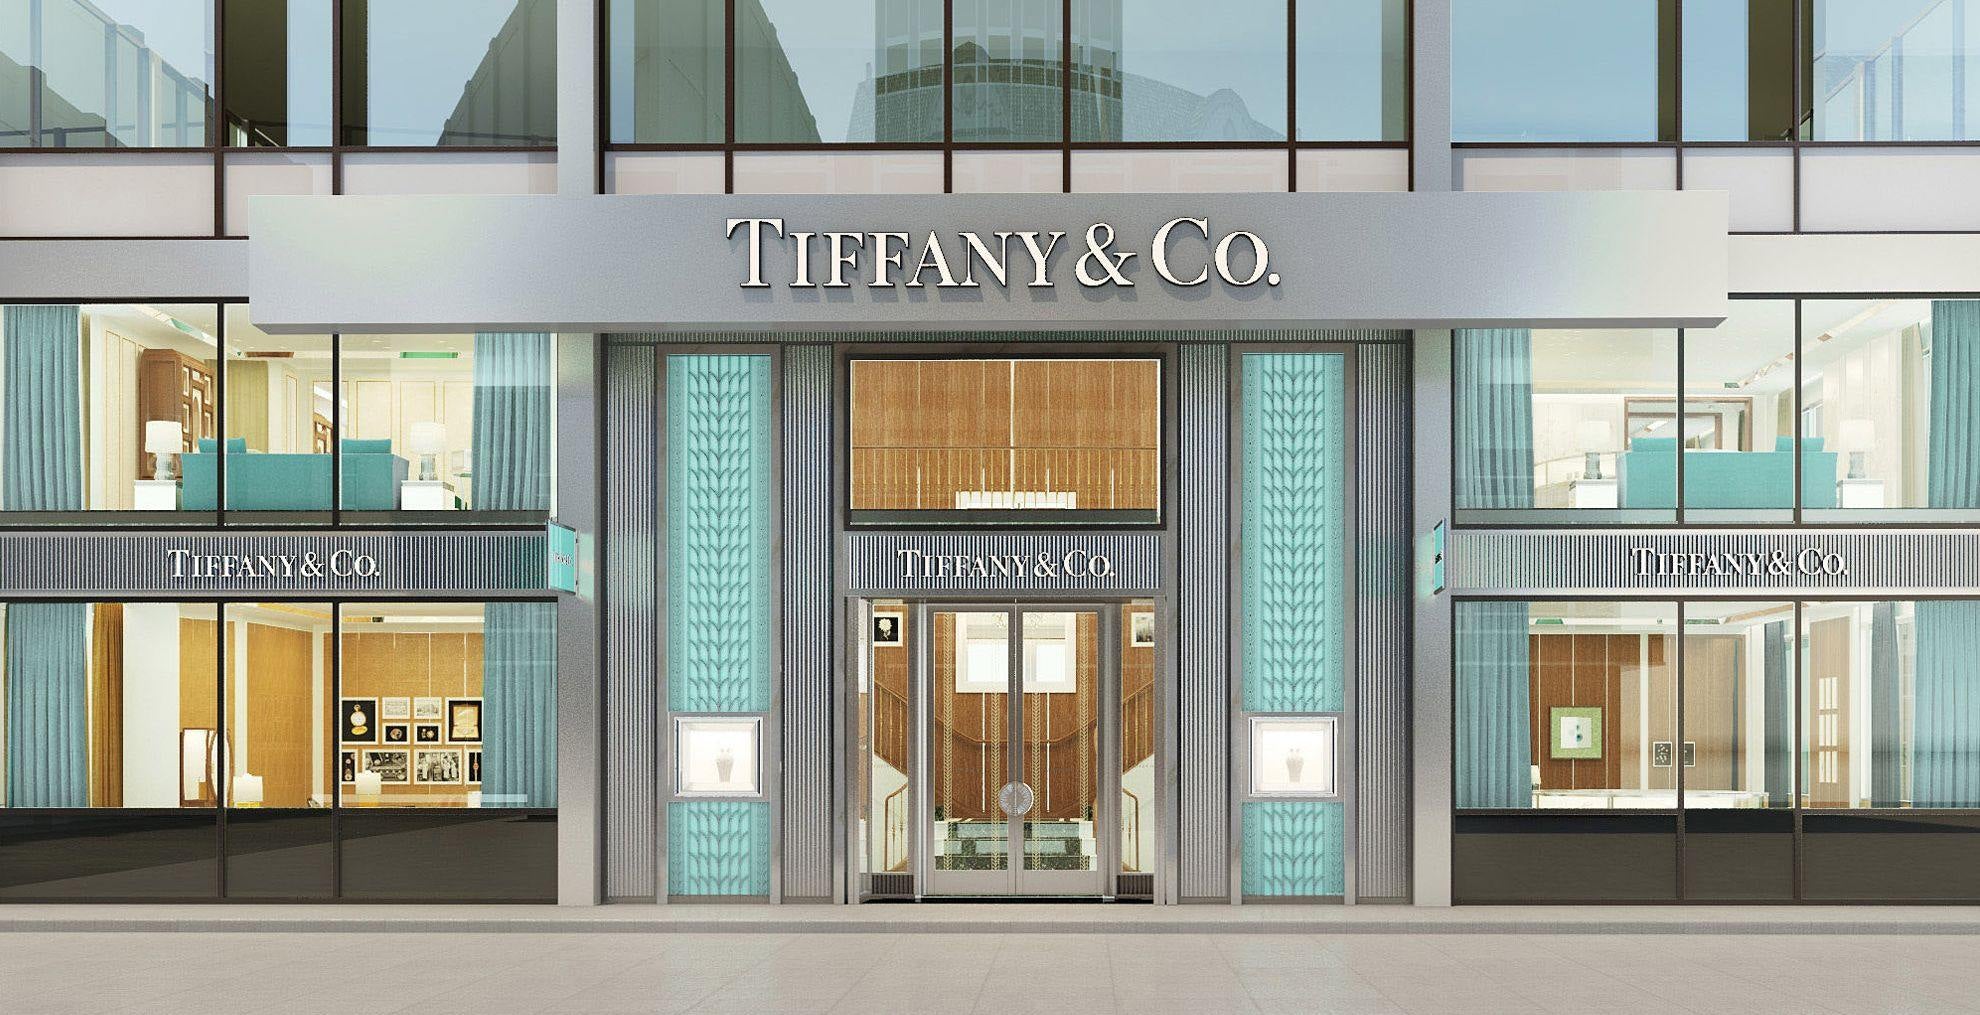 Confirmed: LVMH is buying Tiffany & Co. for $16.2 Billion - Luxfurni